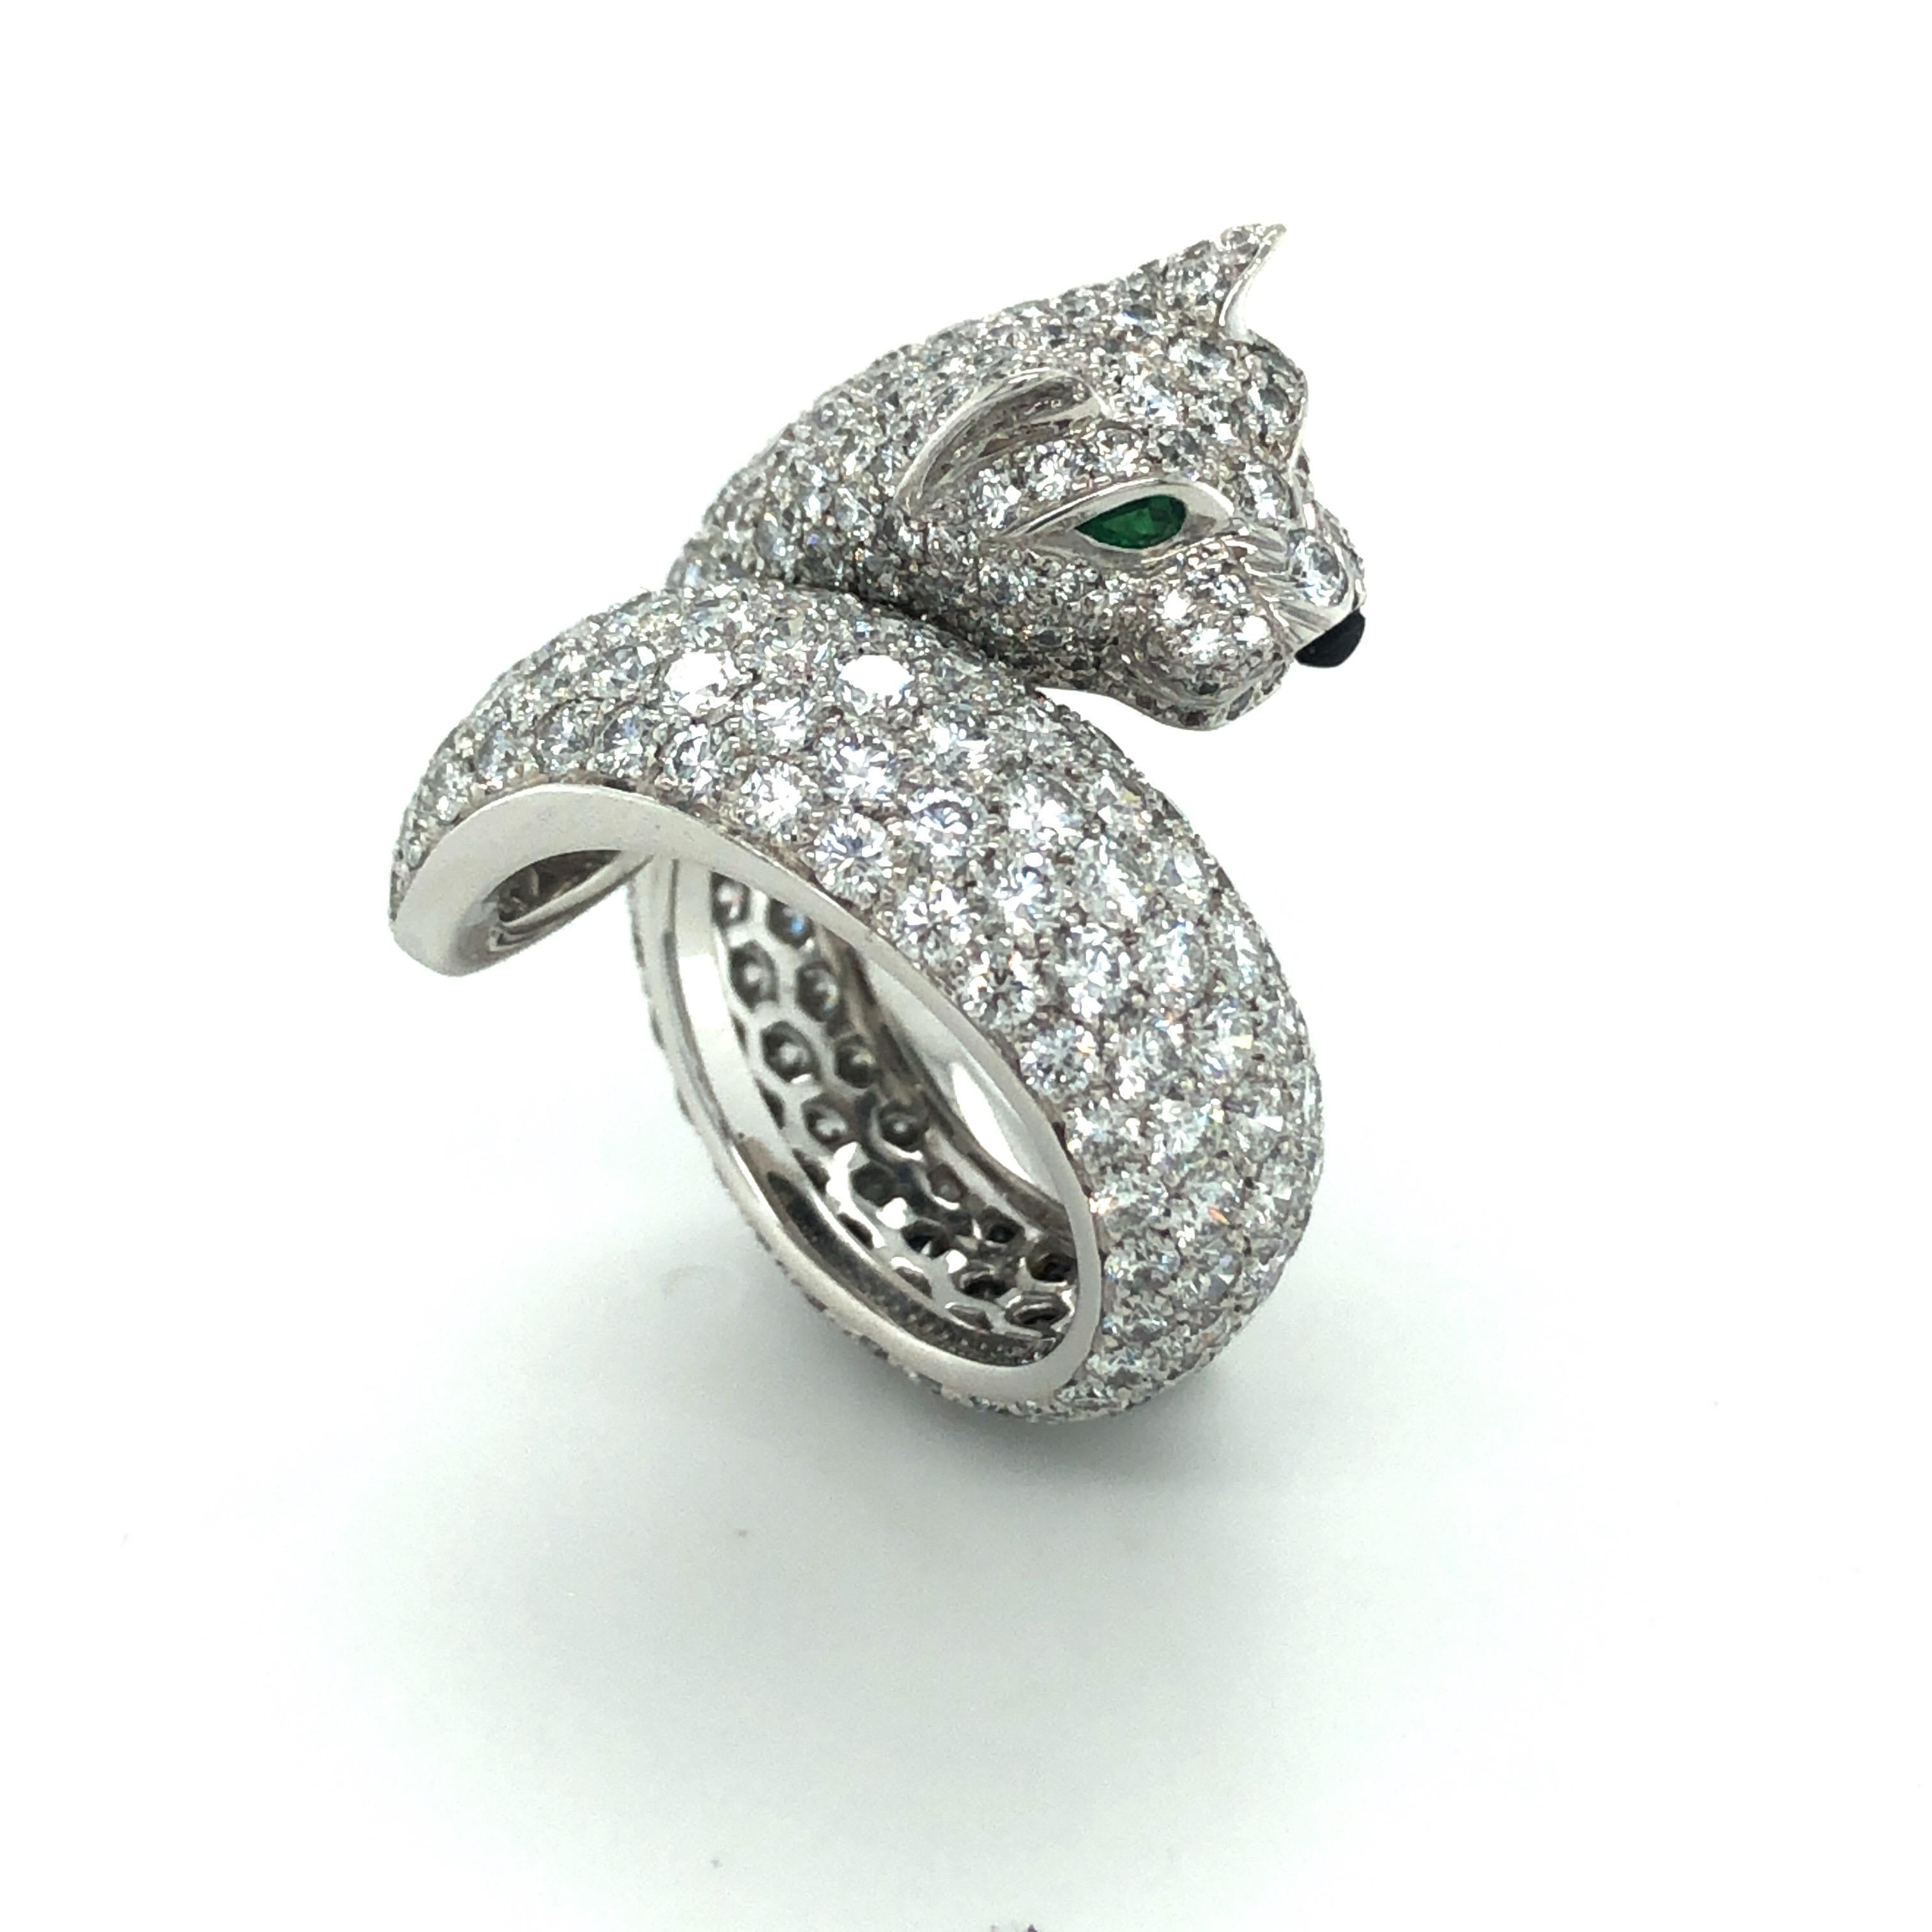 Magnificent Cartier emerald onyx diamond 18 karat white gold Lakarda Panthere ring.

This spectacular ring coils around the finger depicting the Maison's most iconic creature, the panther. It is crafted in 18 karat white gold and fully pavé-set with